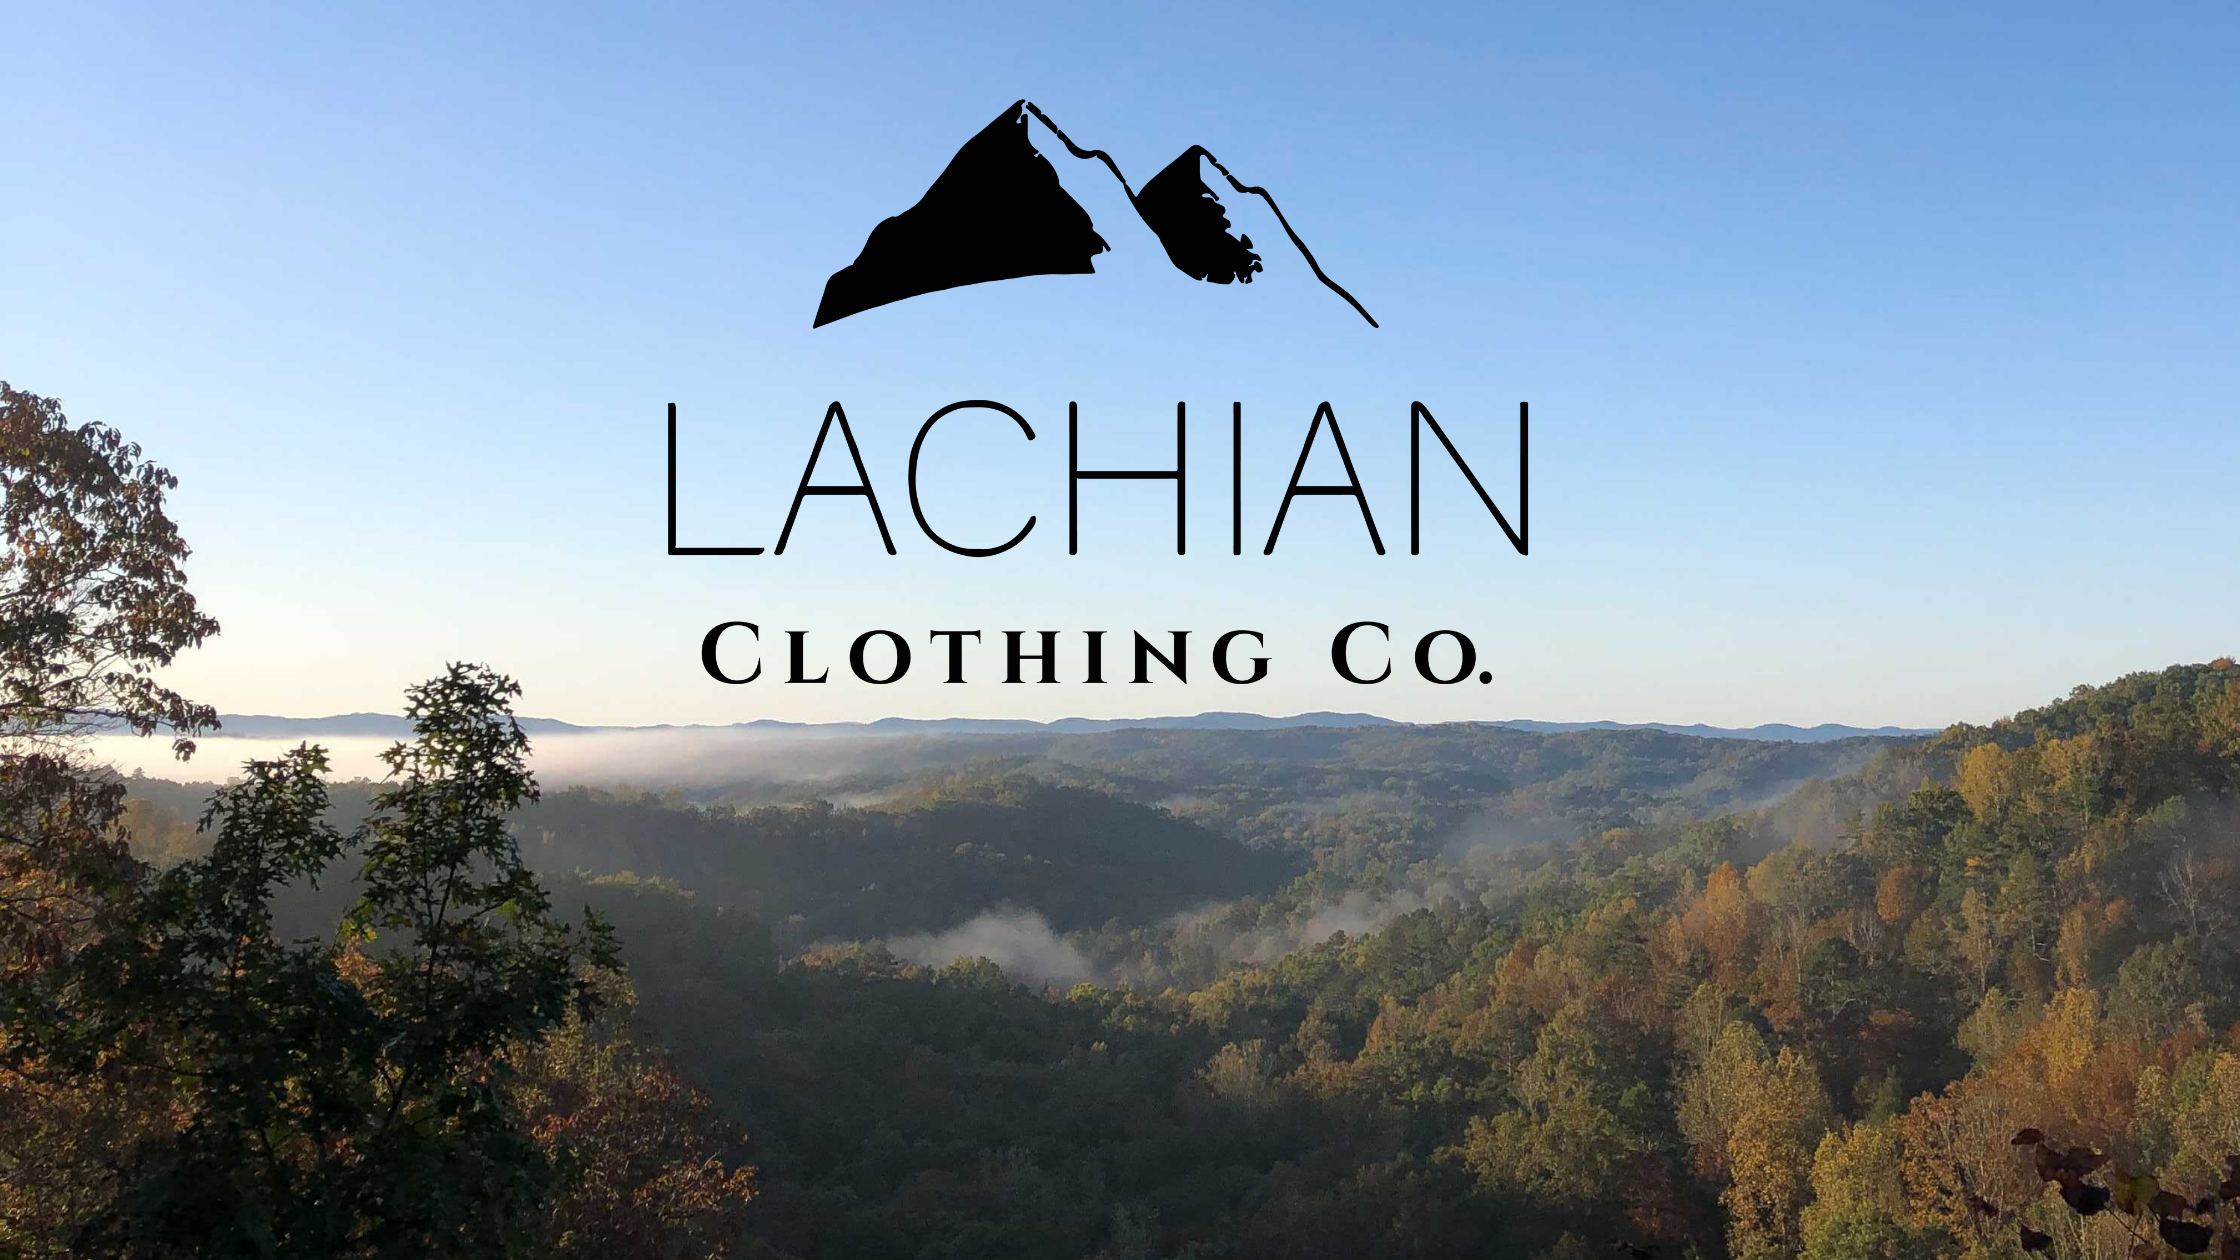 What is Lachian Clothing Co. all about?